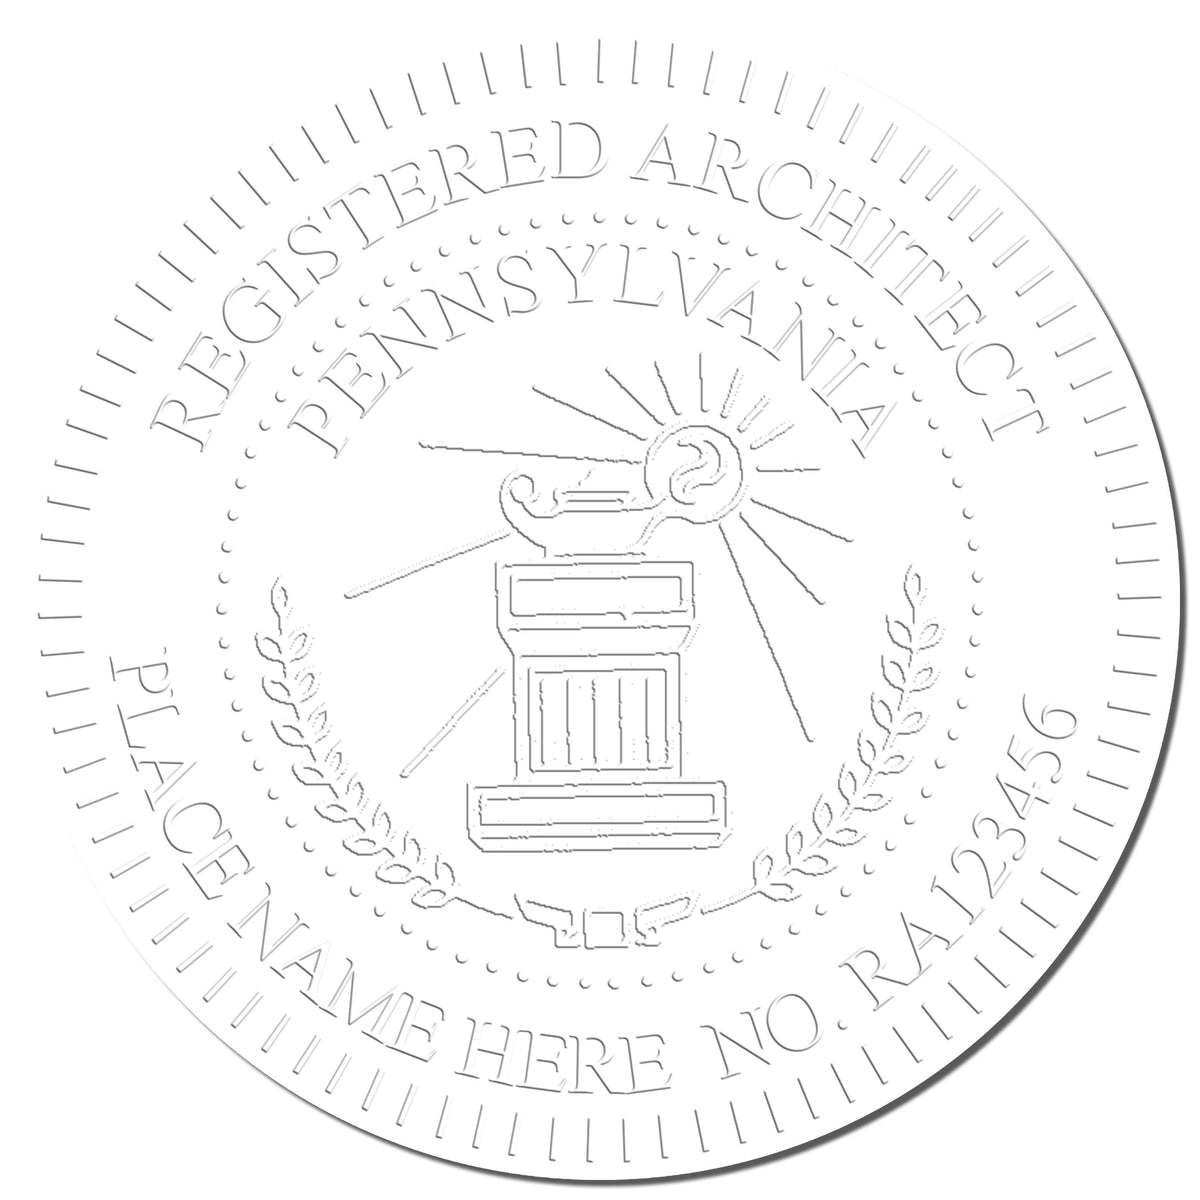 This paper is stamped with a sample imprint of the State of Pennsylvania Architectural Seal Embosser, signifying its quality and reliability.